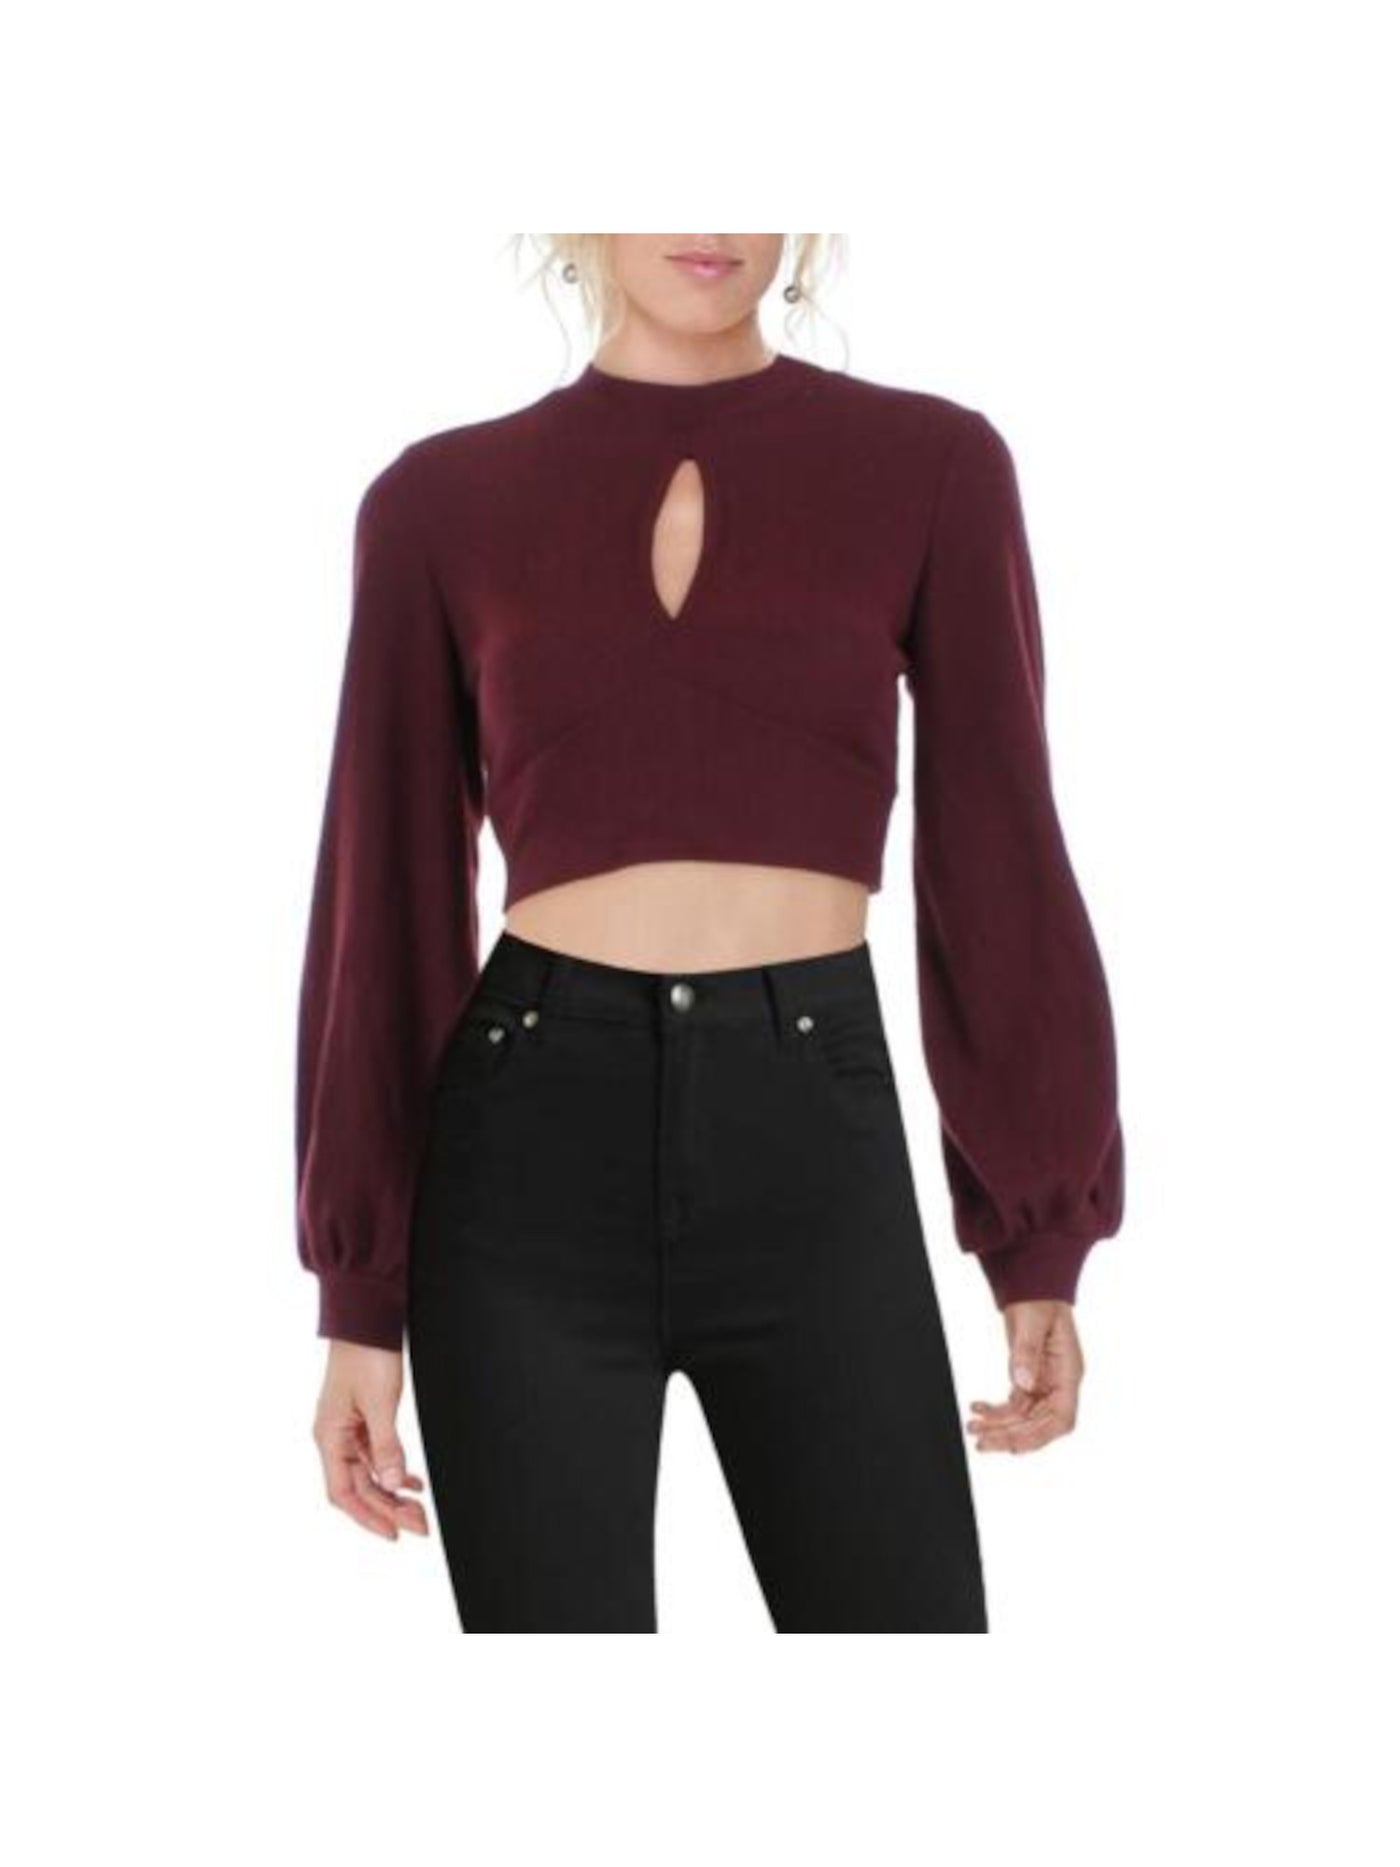 ALMOST FAMOUS Womens Burgundy Cut Out Ribbed Open Tie Back Balloon Sleeve Mock Neck Crop Top Sweater Juniors L